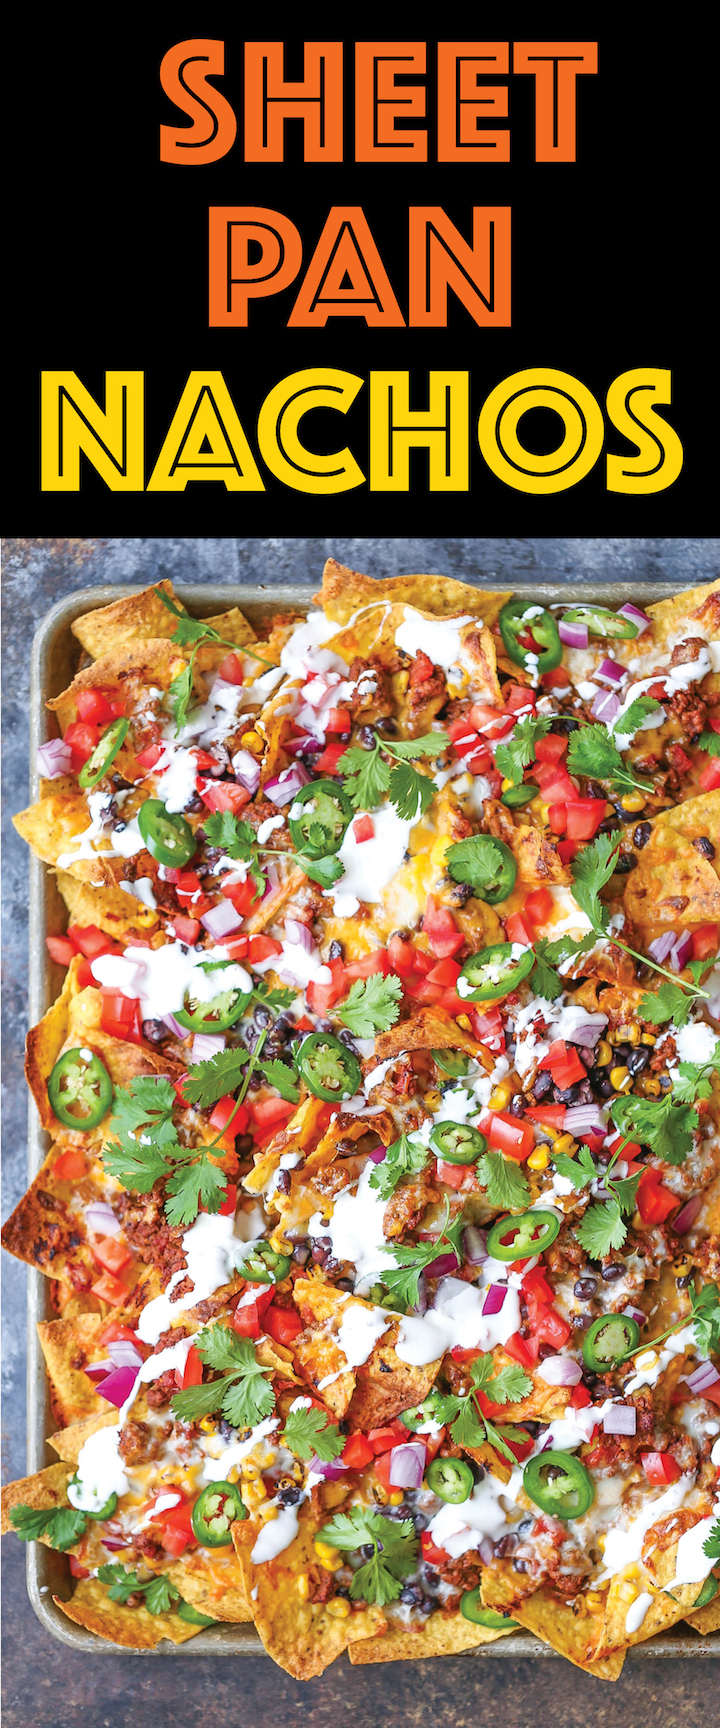 Sheet Pan Nachos - Loaded nachos that are guaranteed to be a crowd-pleaser! Simply layer your toppings, bake onto a sheet pan and serve. Done. Easy peasy!